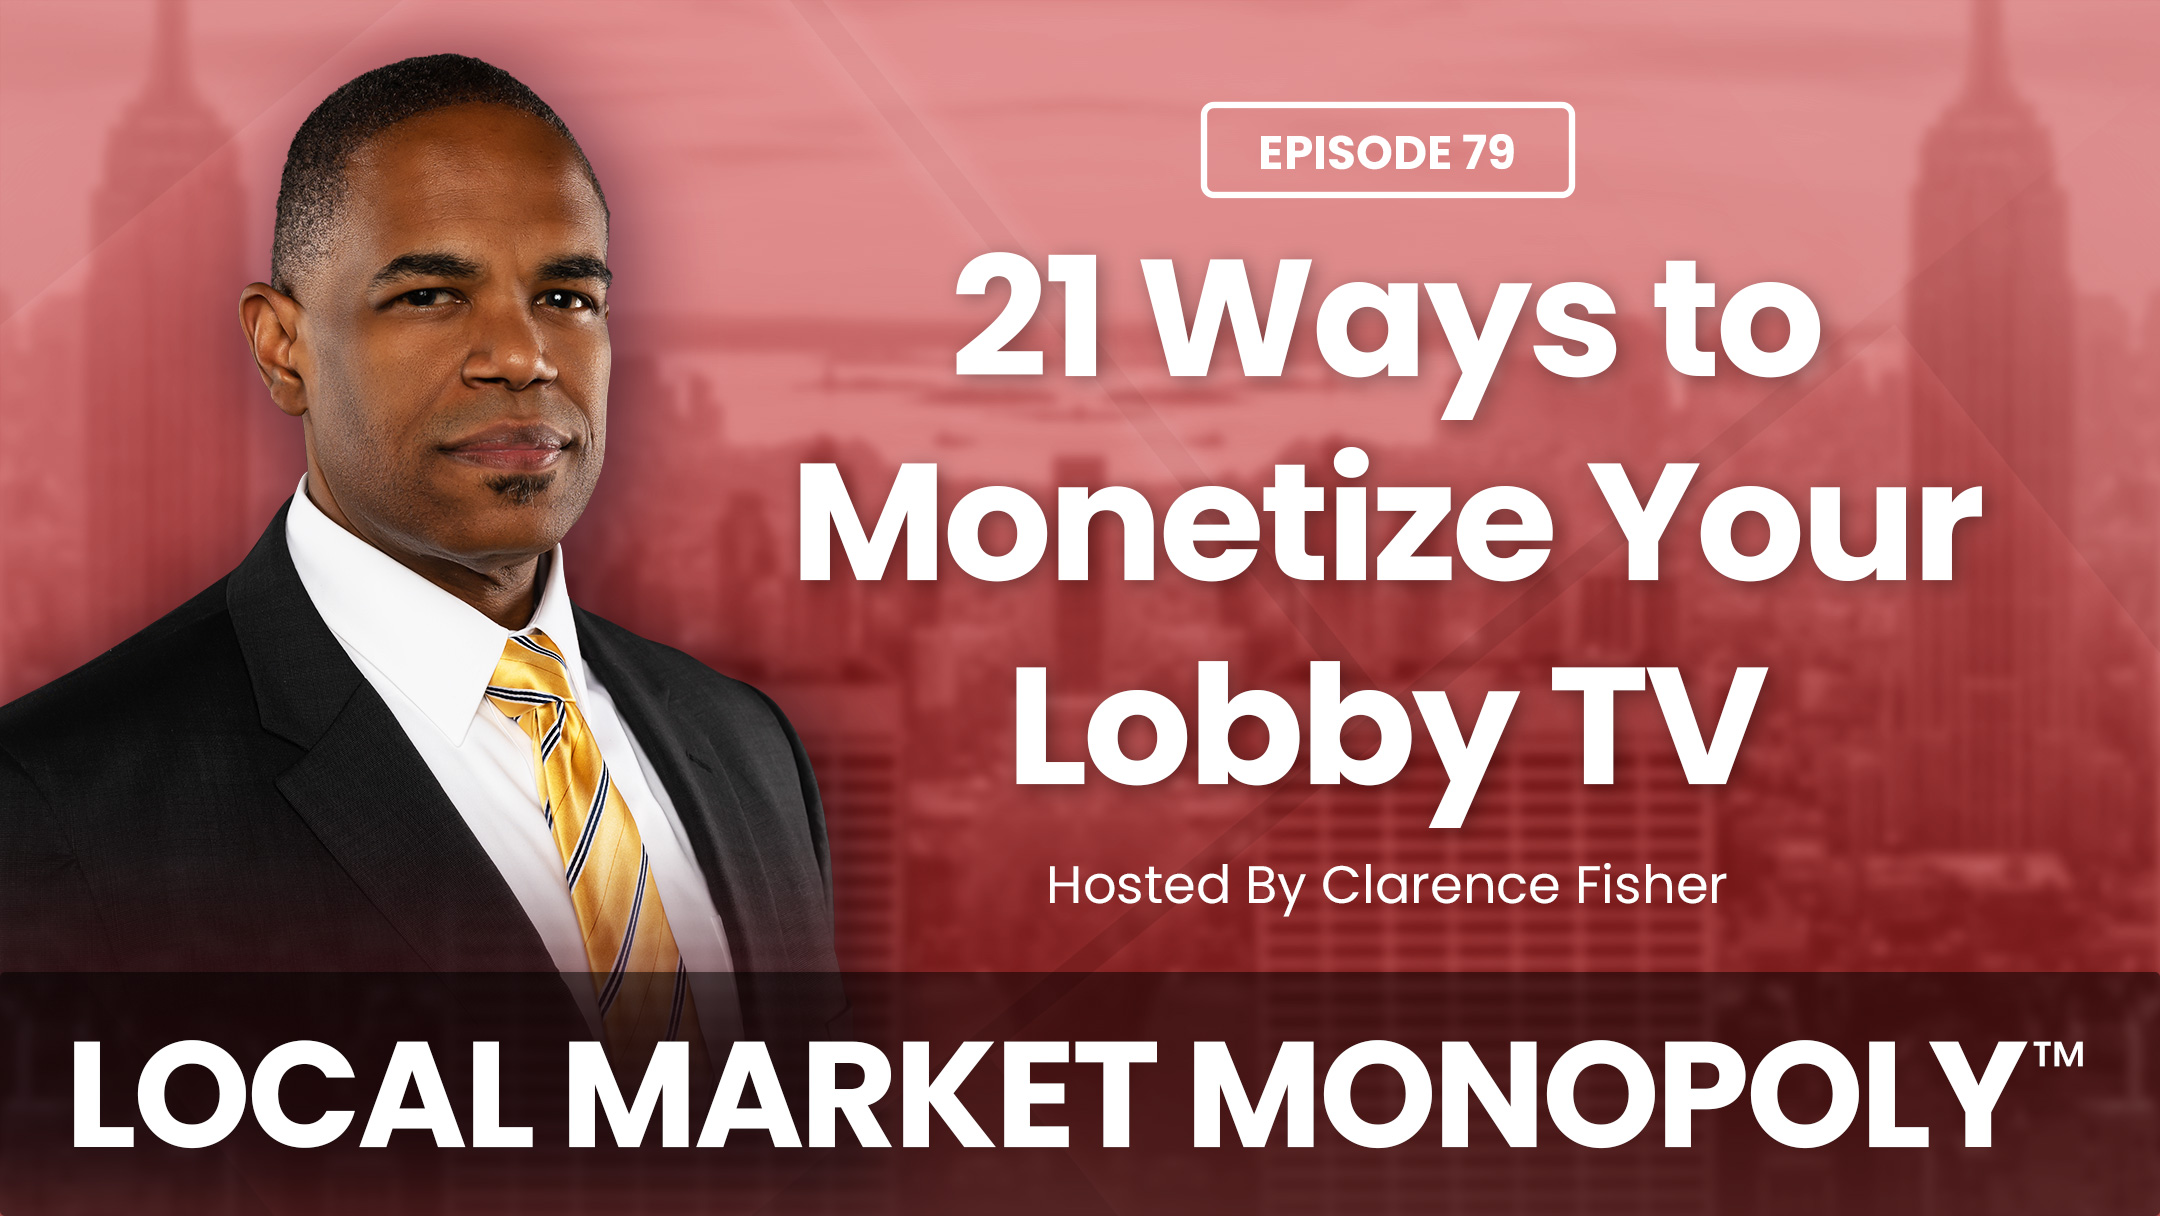 21 Ways to Monetize Your Lobby TV